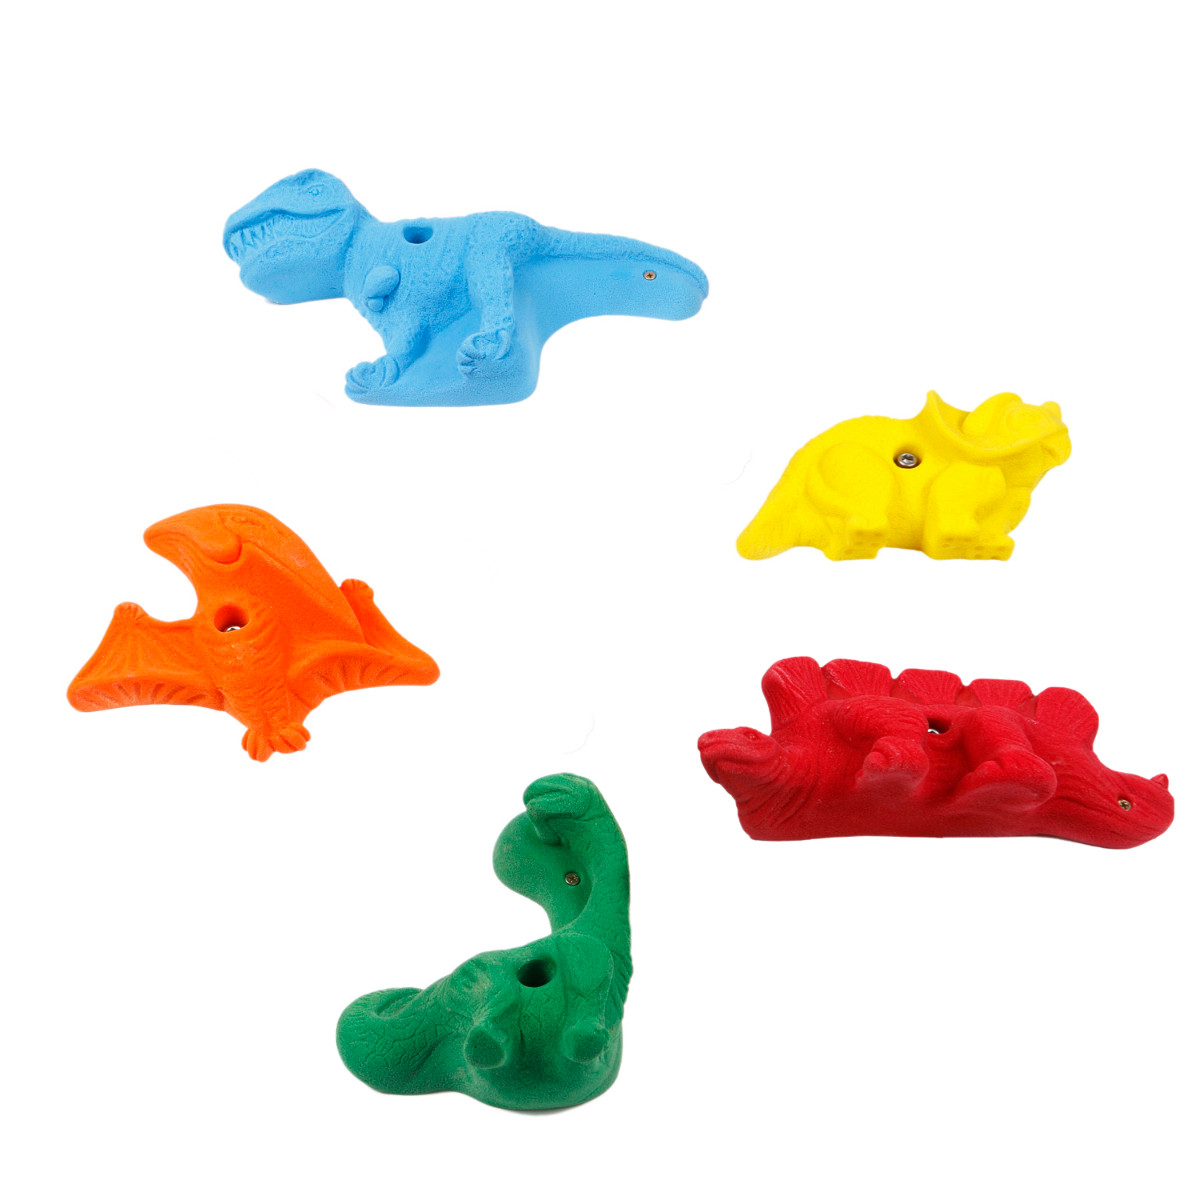 XL Dinosaur Climbing Holds - Bolt-ons - Assorted Primary Colors